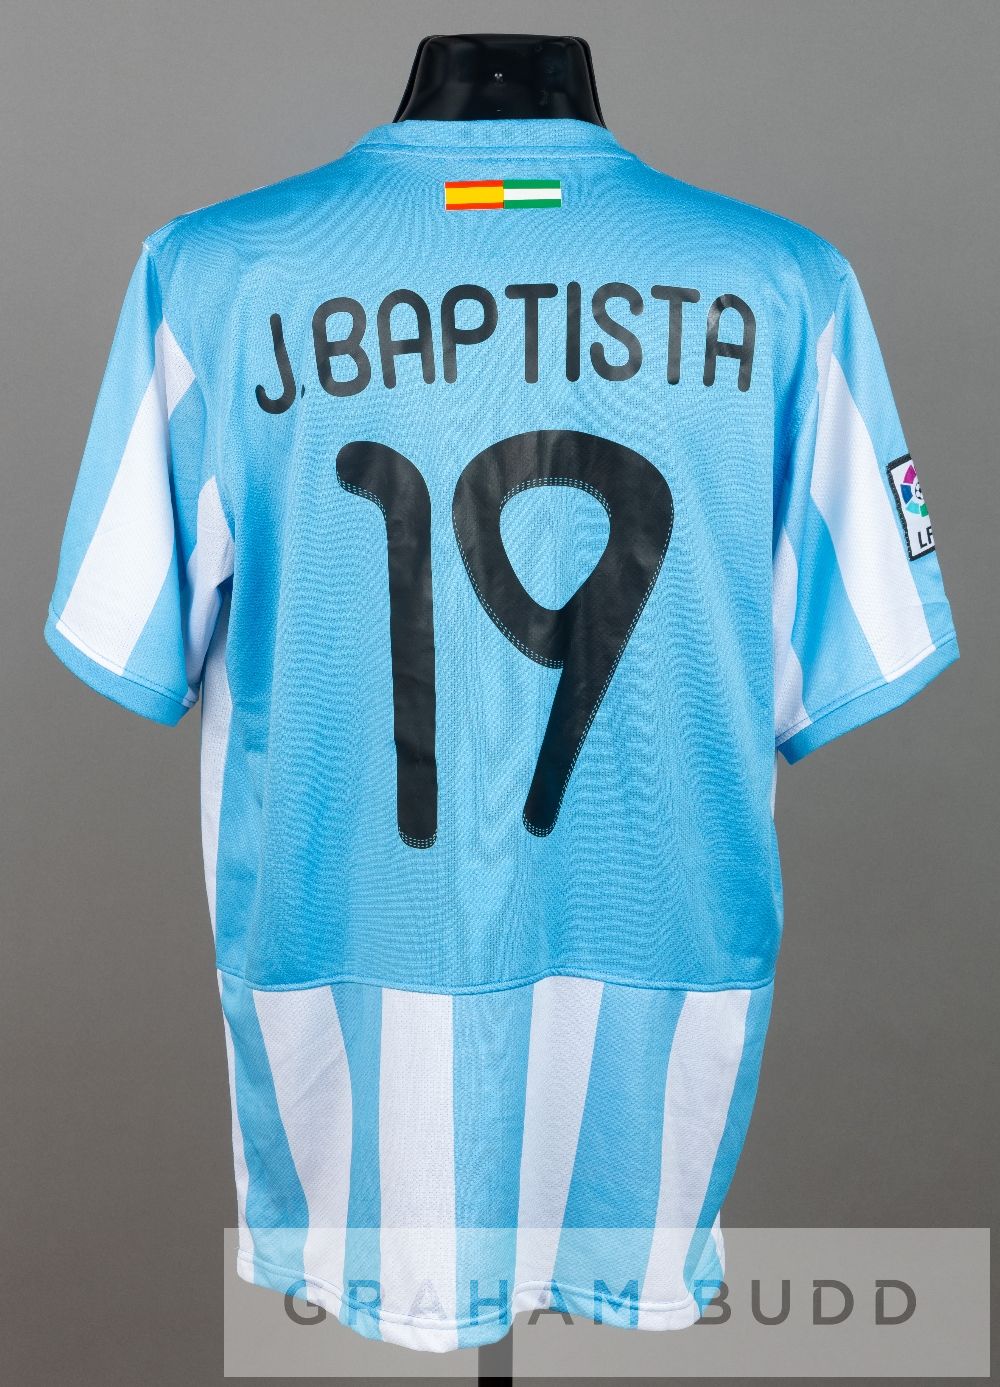 Julio Baptista blue and white striped Malaga C.F. no.19 home jersey, season 2011-12, short-sleeved - Image 2 of 2